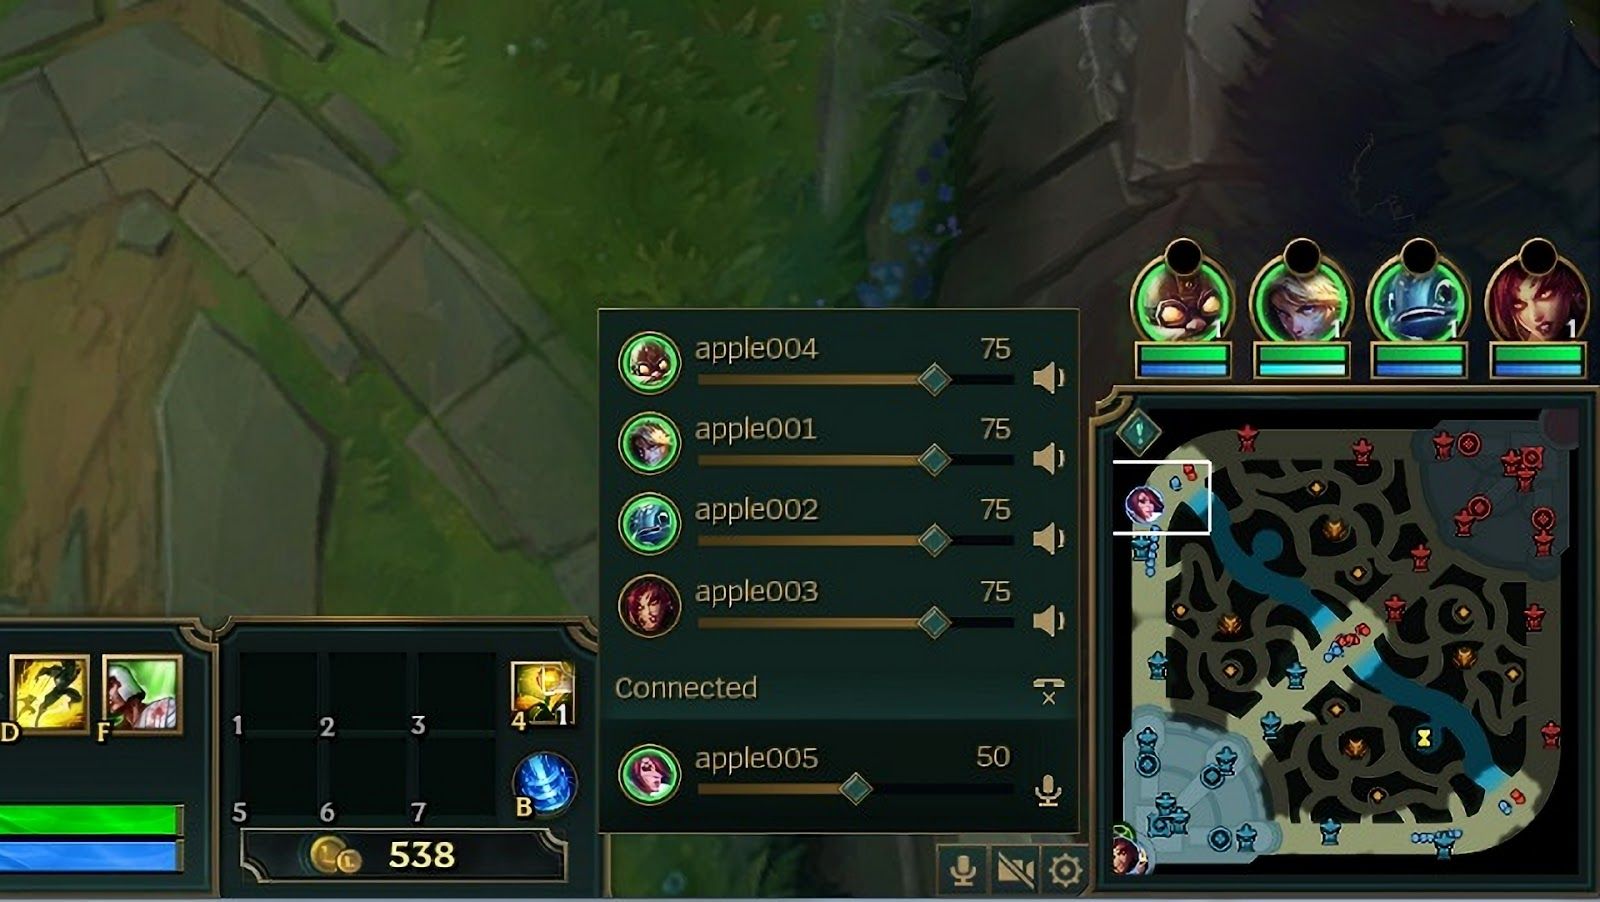 voice communication in LoL match